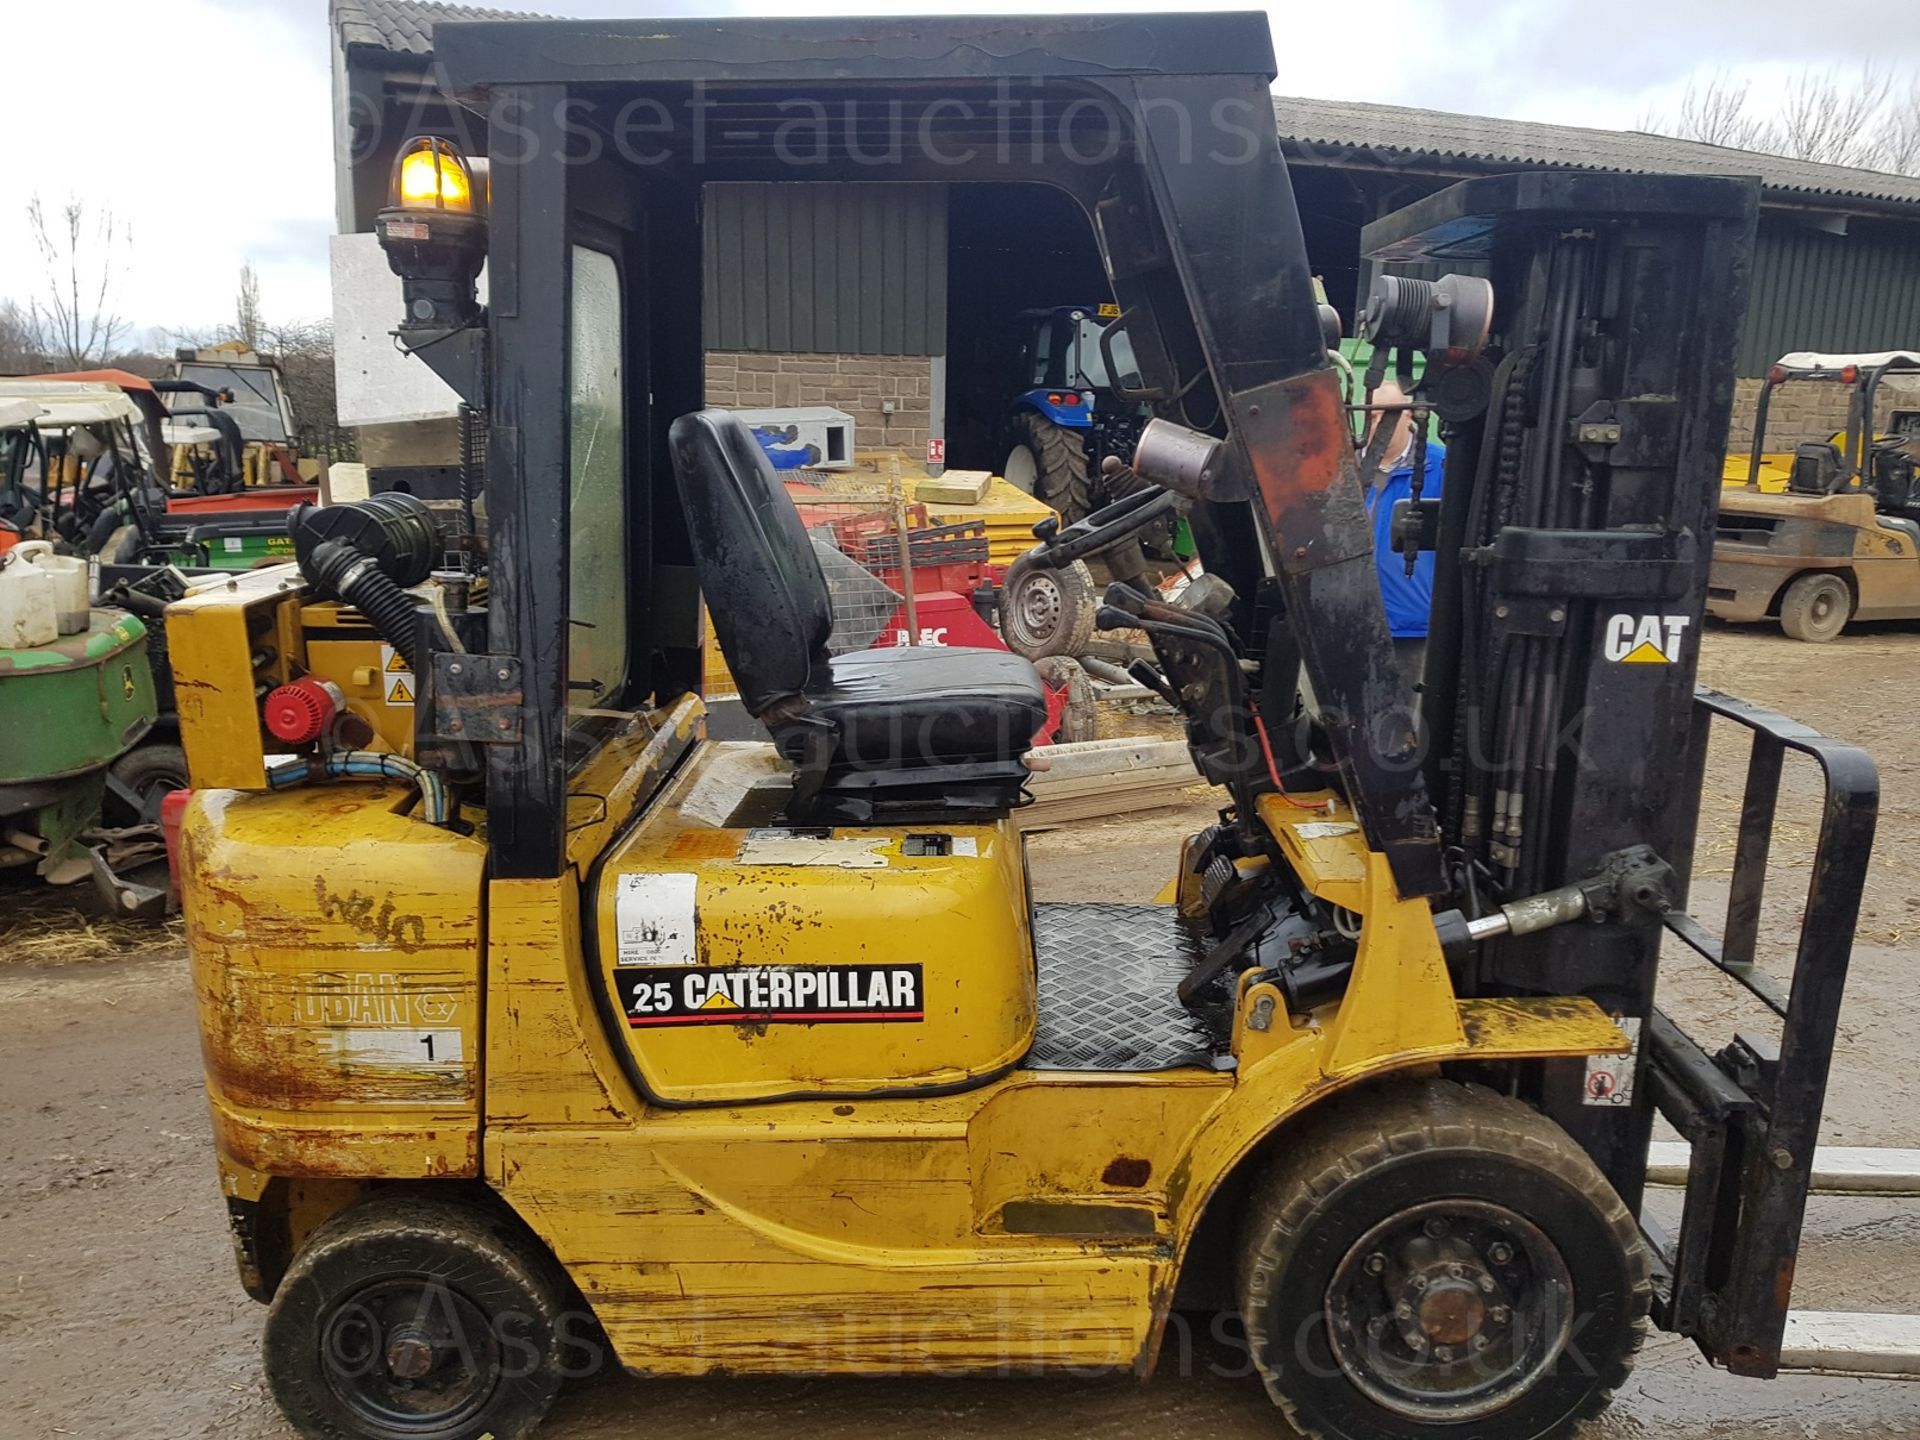 2001 CATERPILLAR 25 FORKLIFT CONTAINER SPEC WITH SIDE SHIFT, STARTS, RUNS AND LIFTS *PLUS VAT* - Image 2 of 7